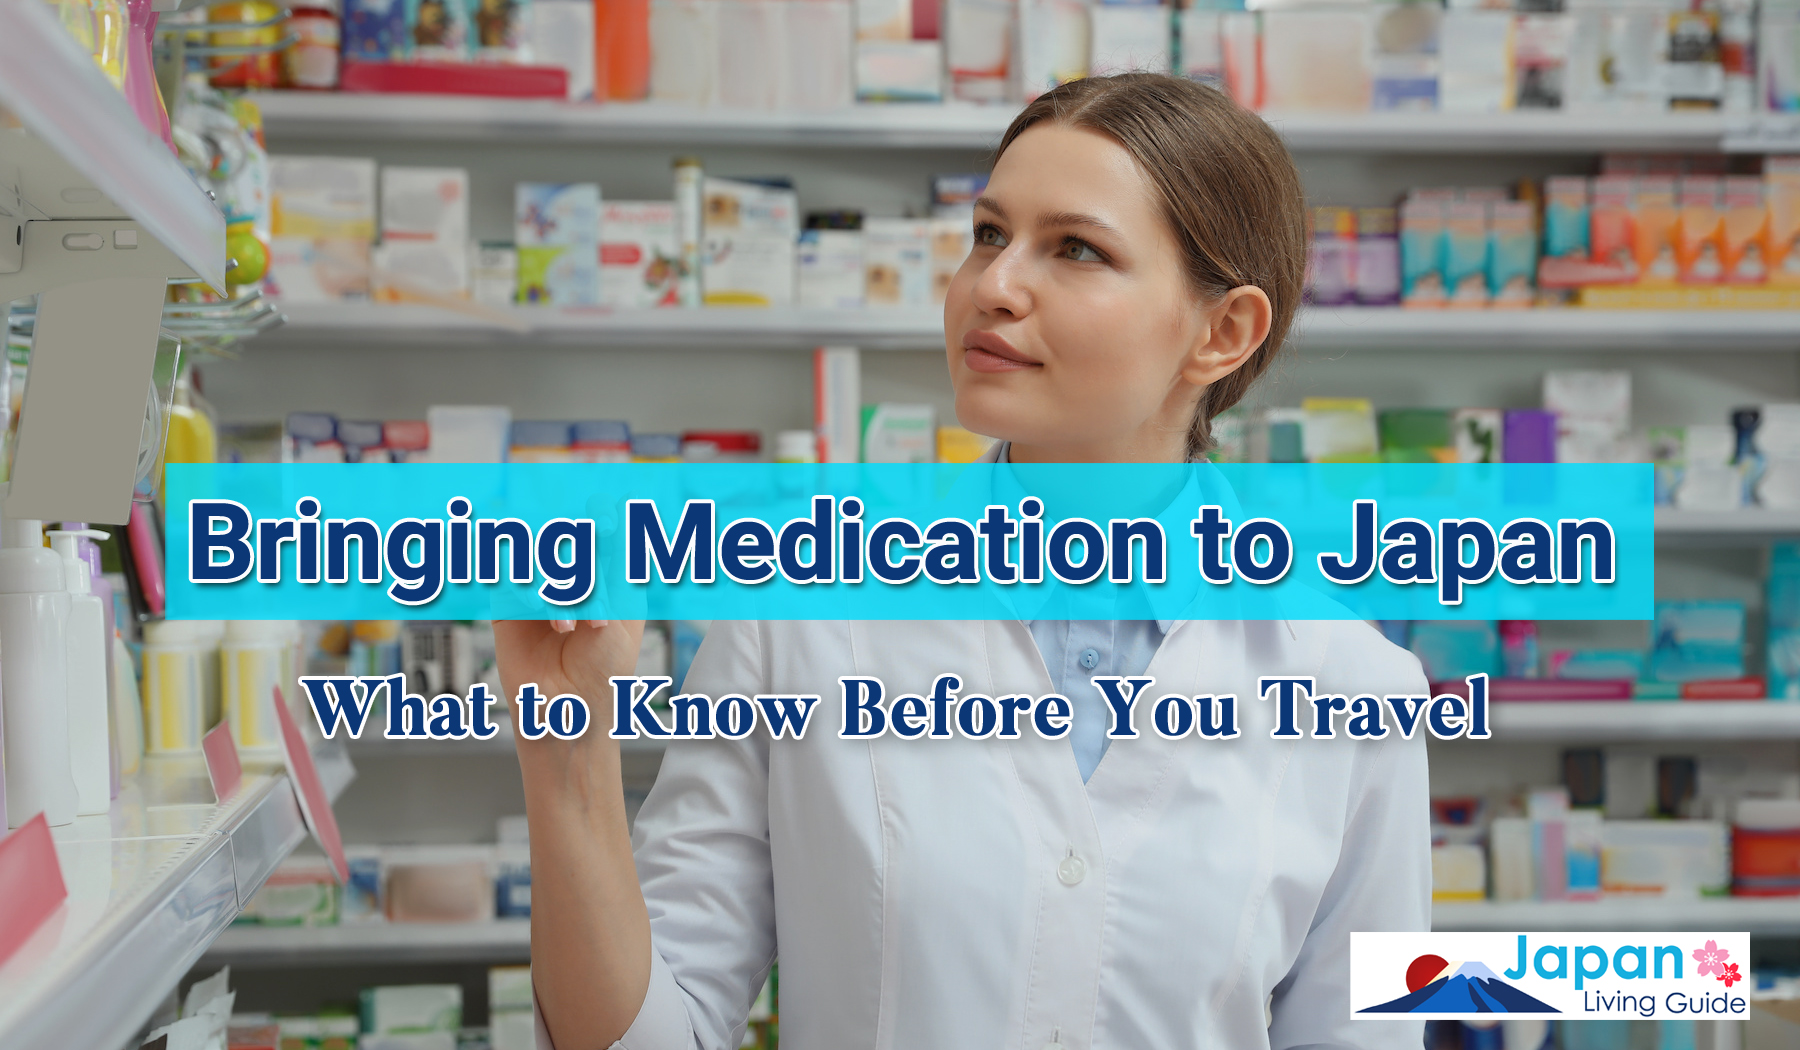 The Safest Way to Bring Medications to Japan